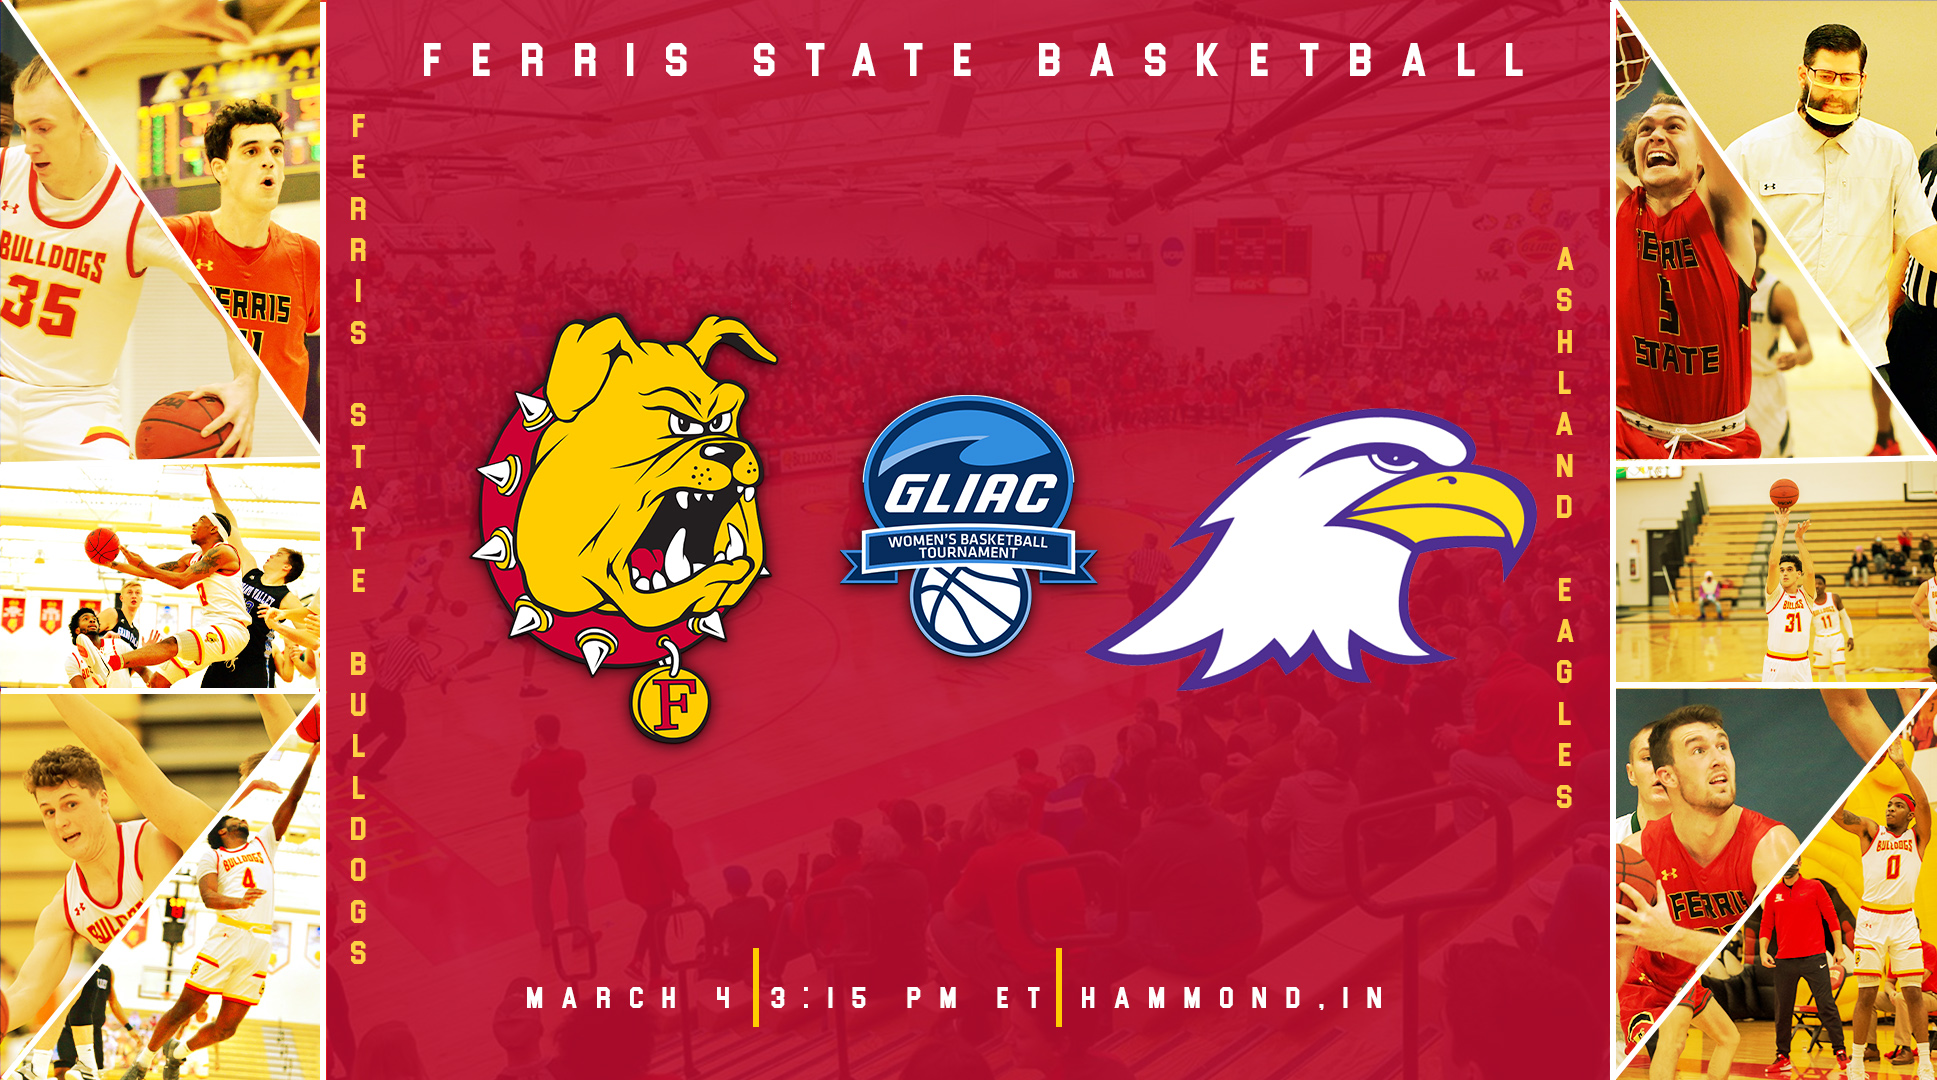 Ferris State Squares Off With Ashland In GLIAC Men's Basketball Quarterfinals On Thursday